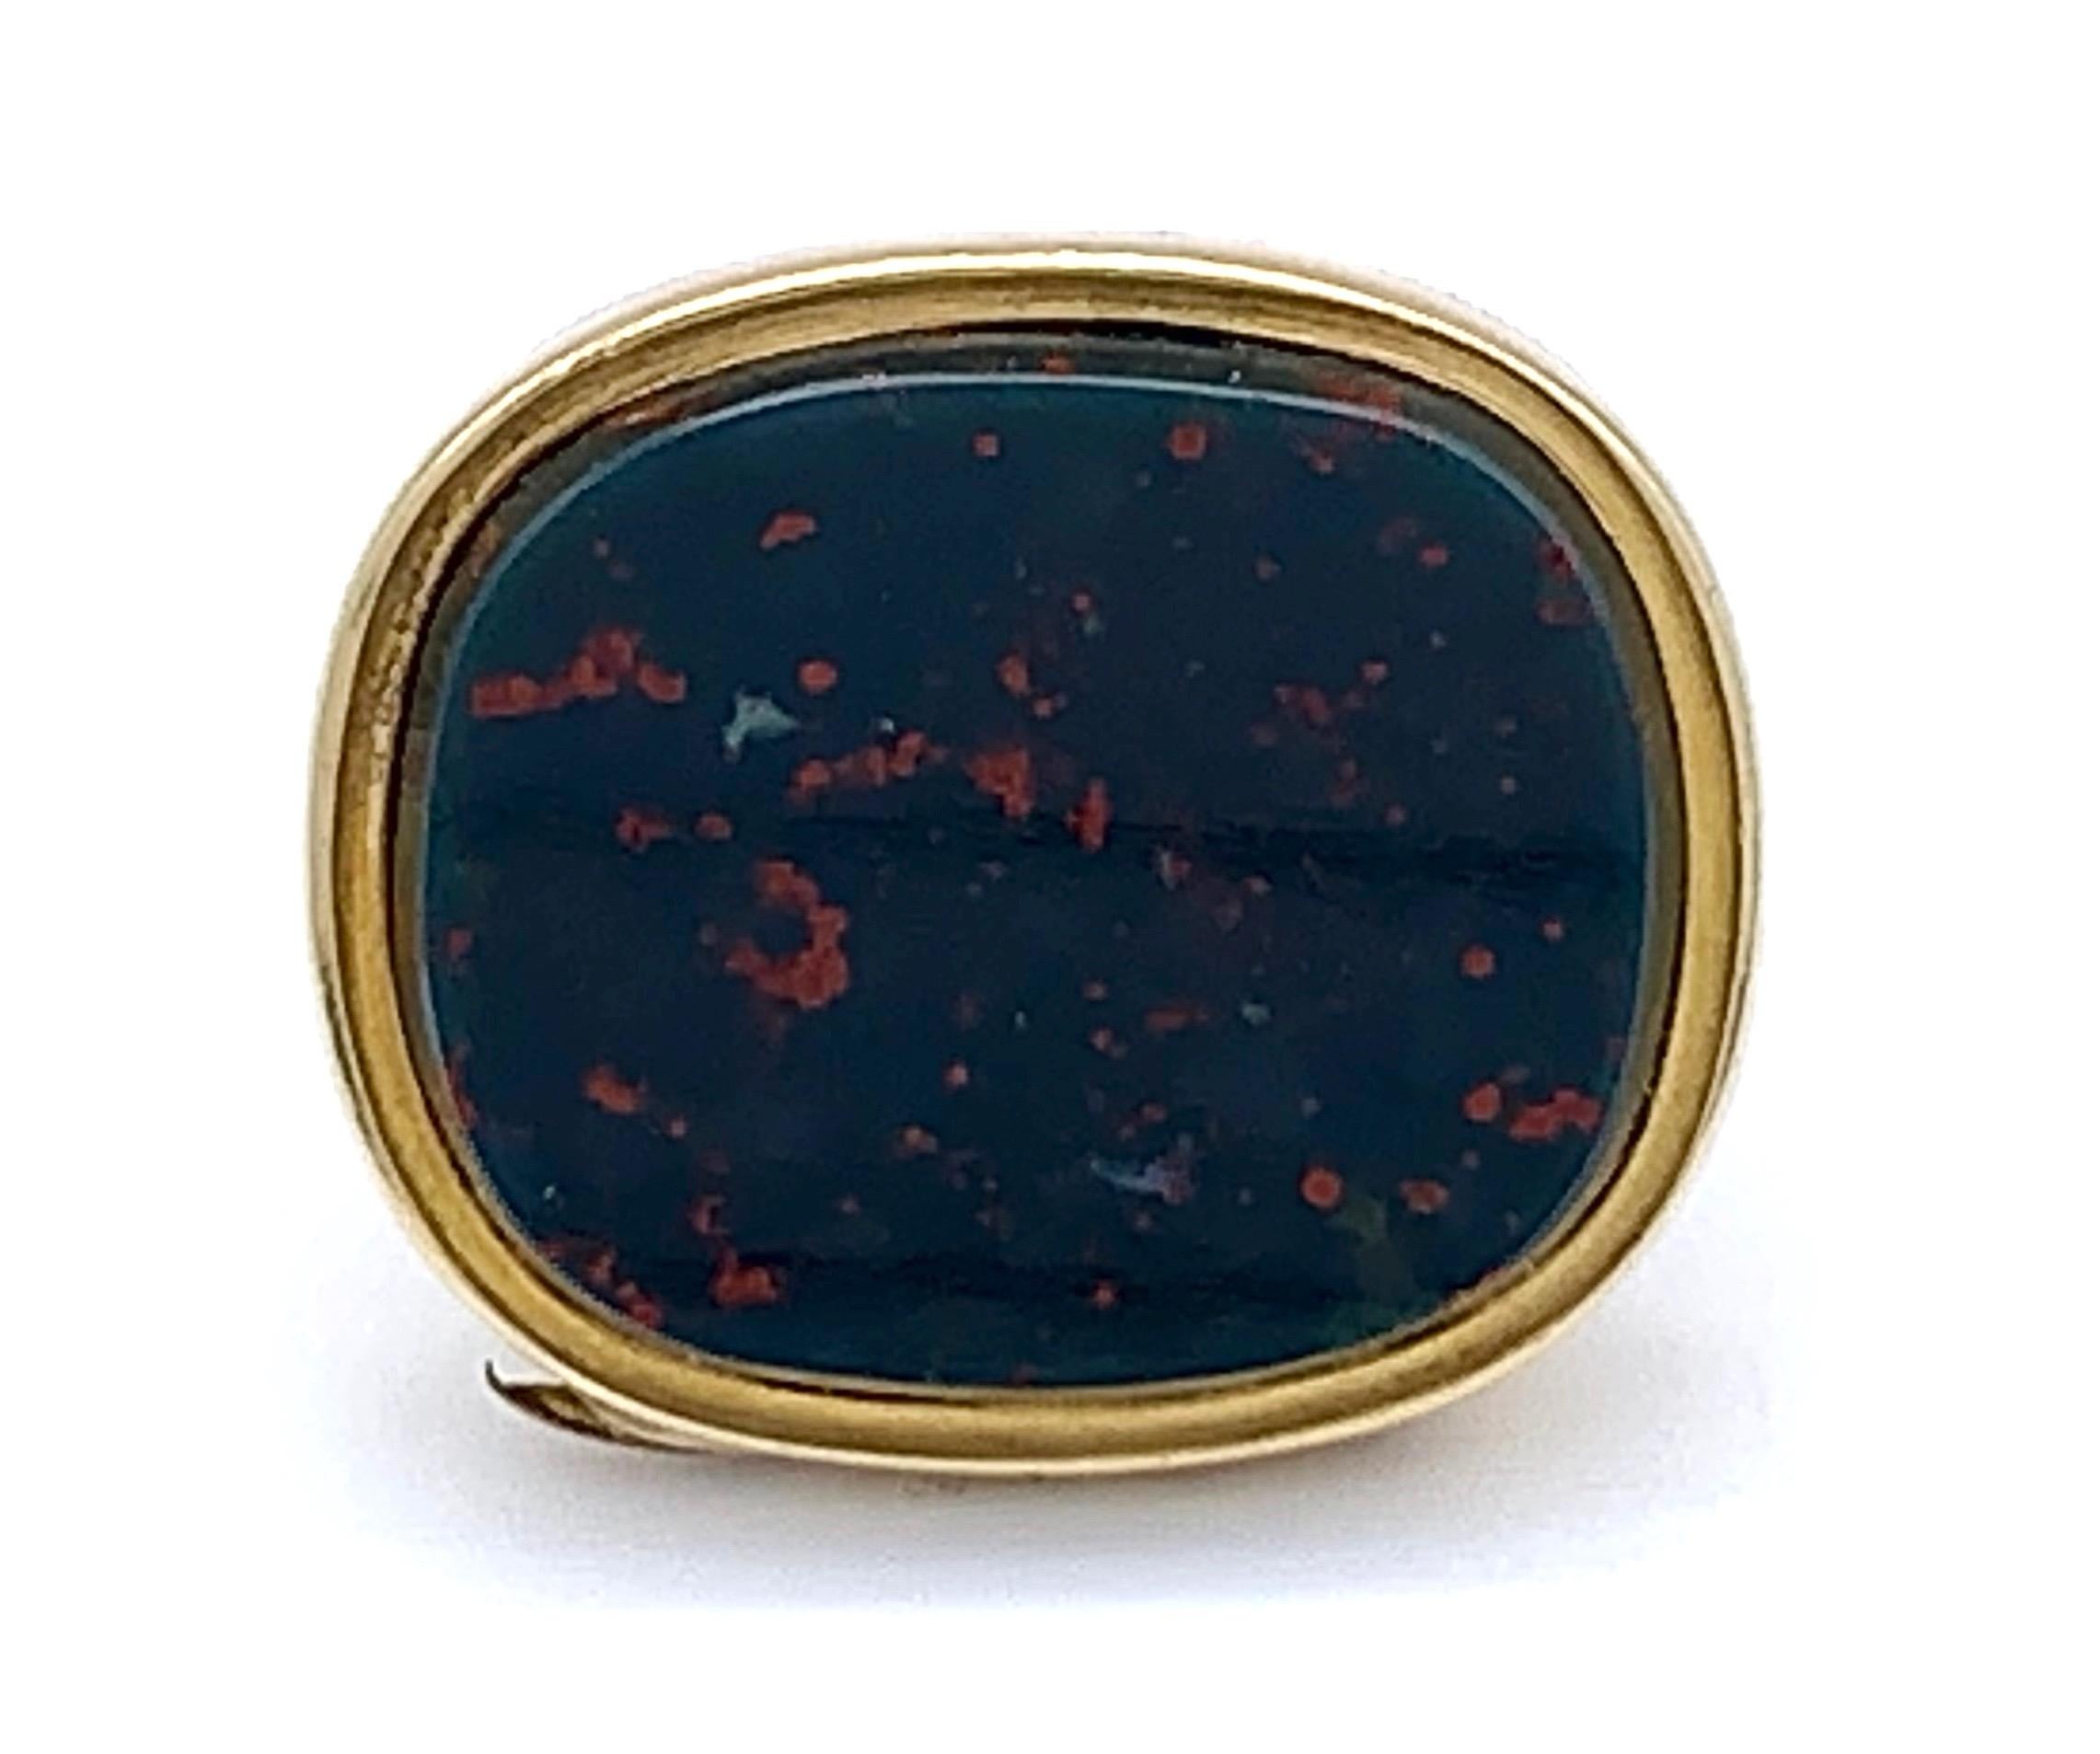 Unusual gold seal that has been designed as a locket. The unused base is made out of a hinged gold mounted bloodstone. The top of the locked is decorated with a carefully chiselled and engraved flower and leaves in two colour gold.